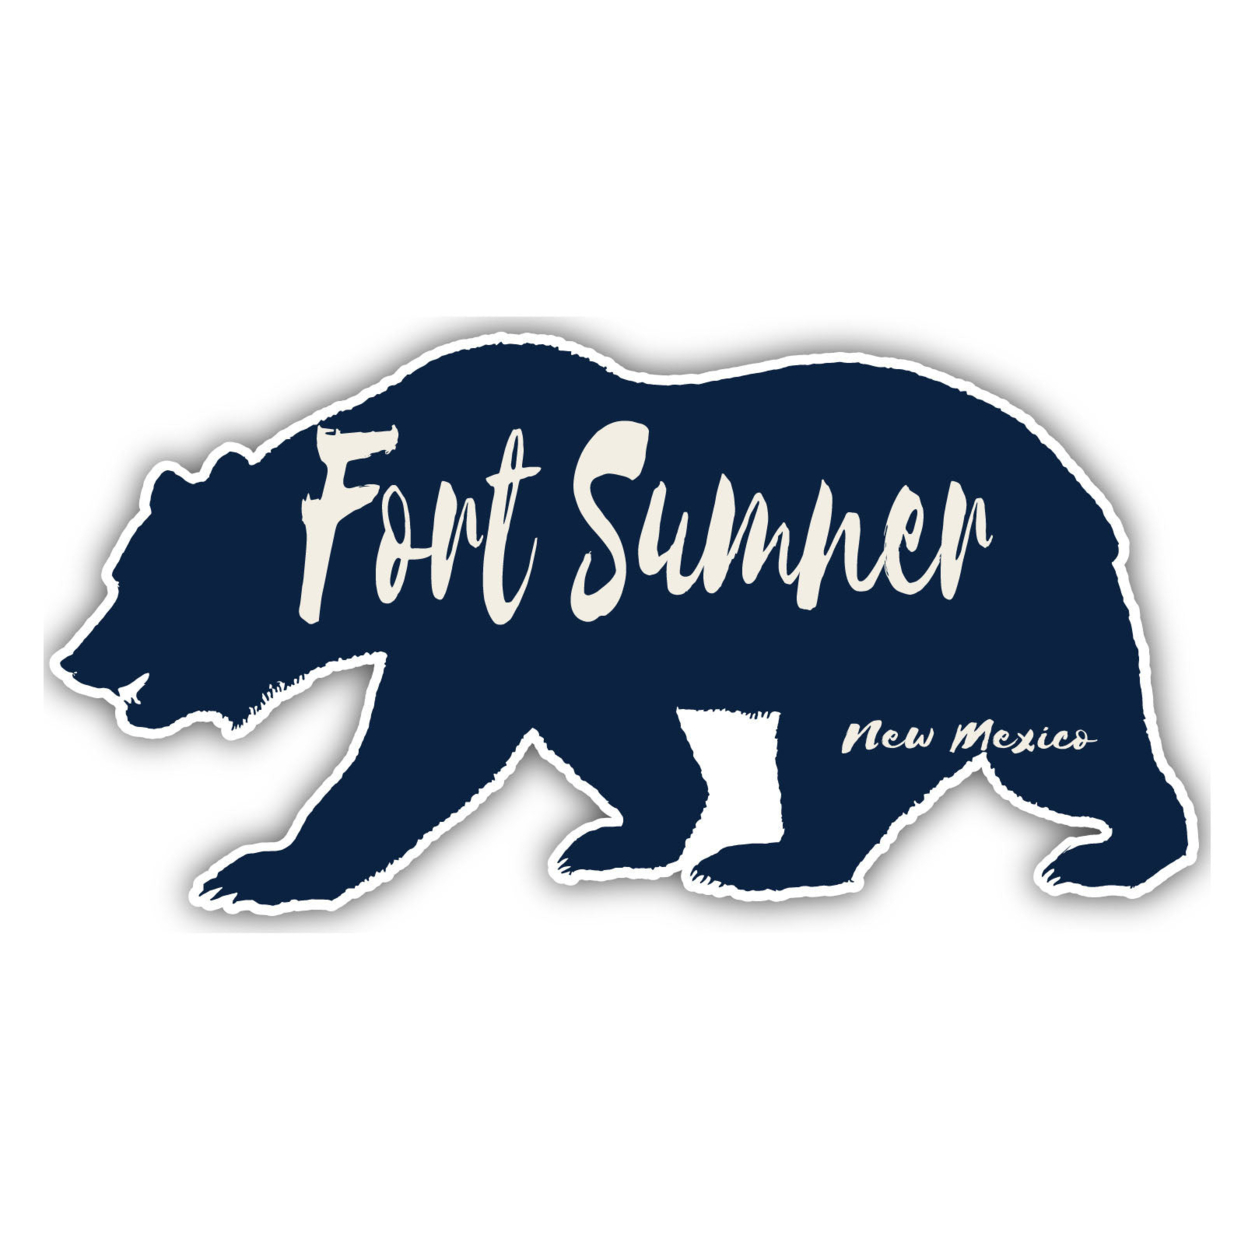 Fort Sumner New Mexico Souvenir Decorative Stickers (Choose Theme And Size) - Single Unit, 12-Inch, Bear